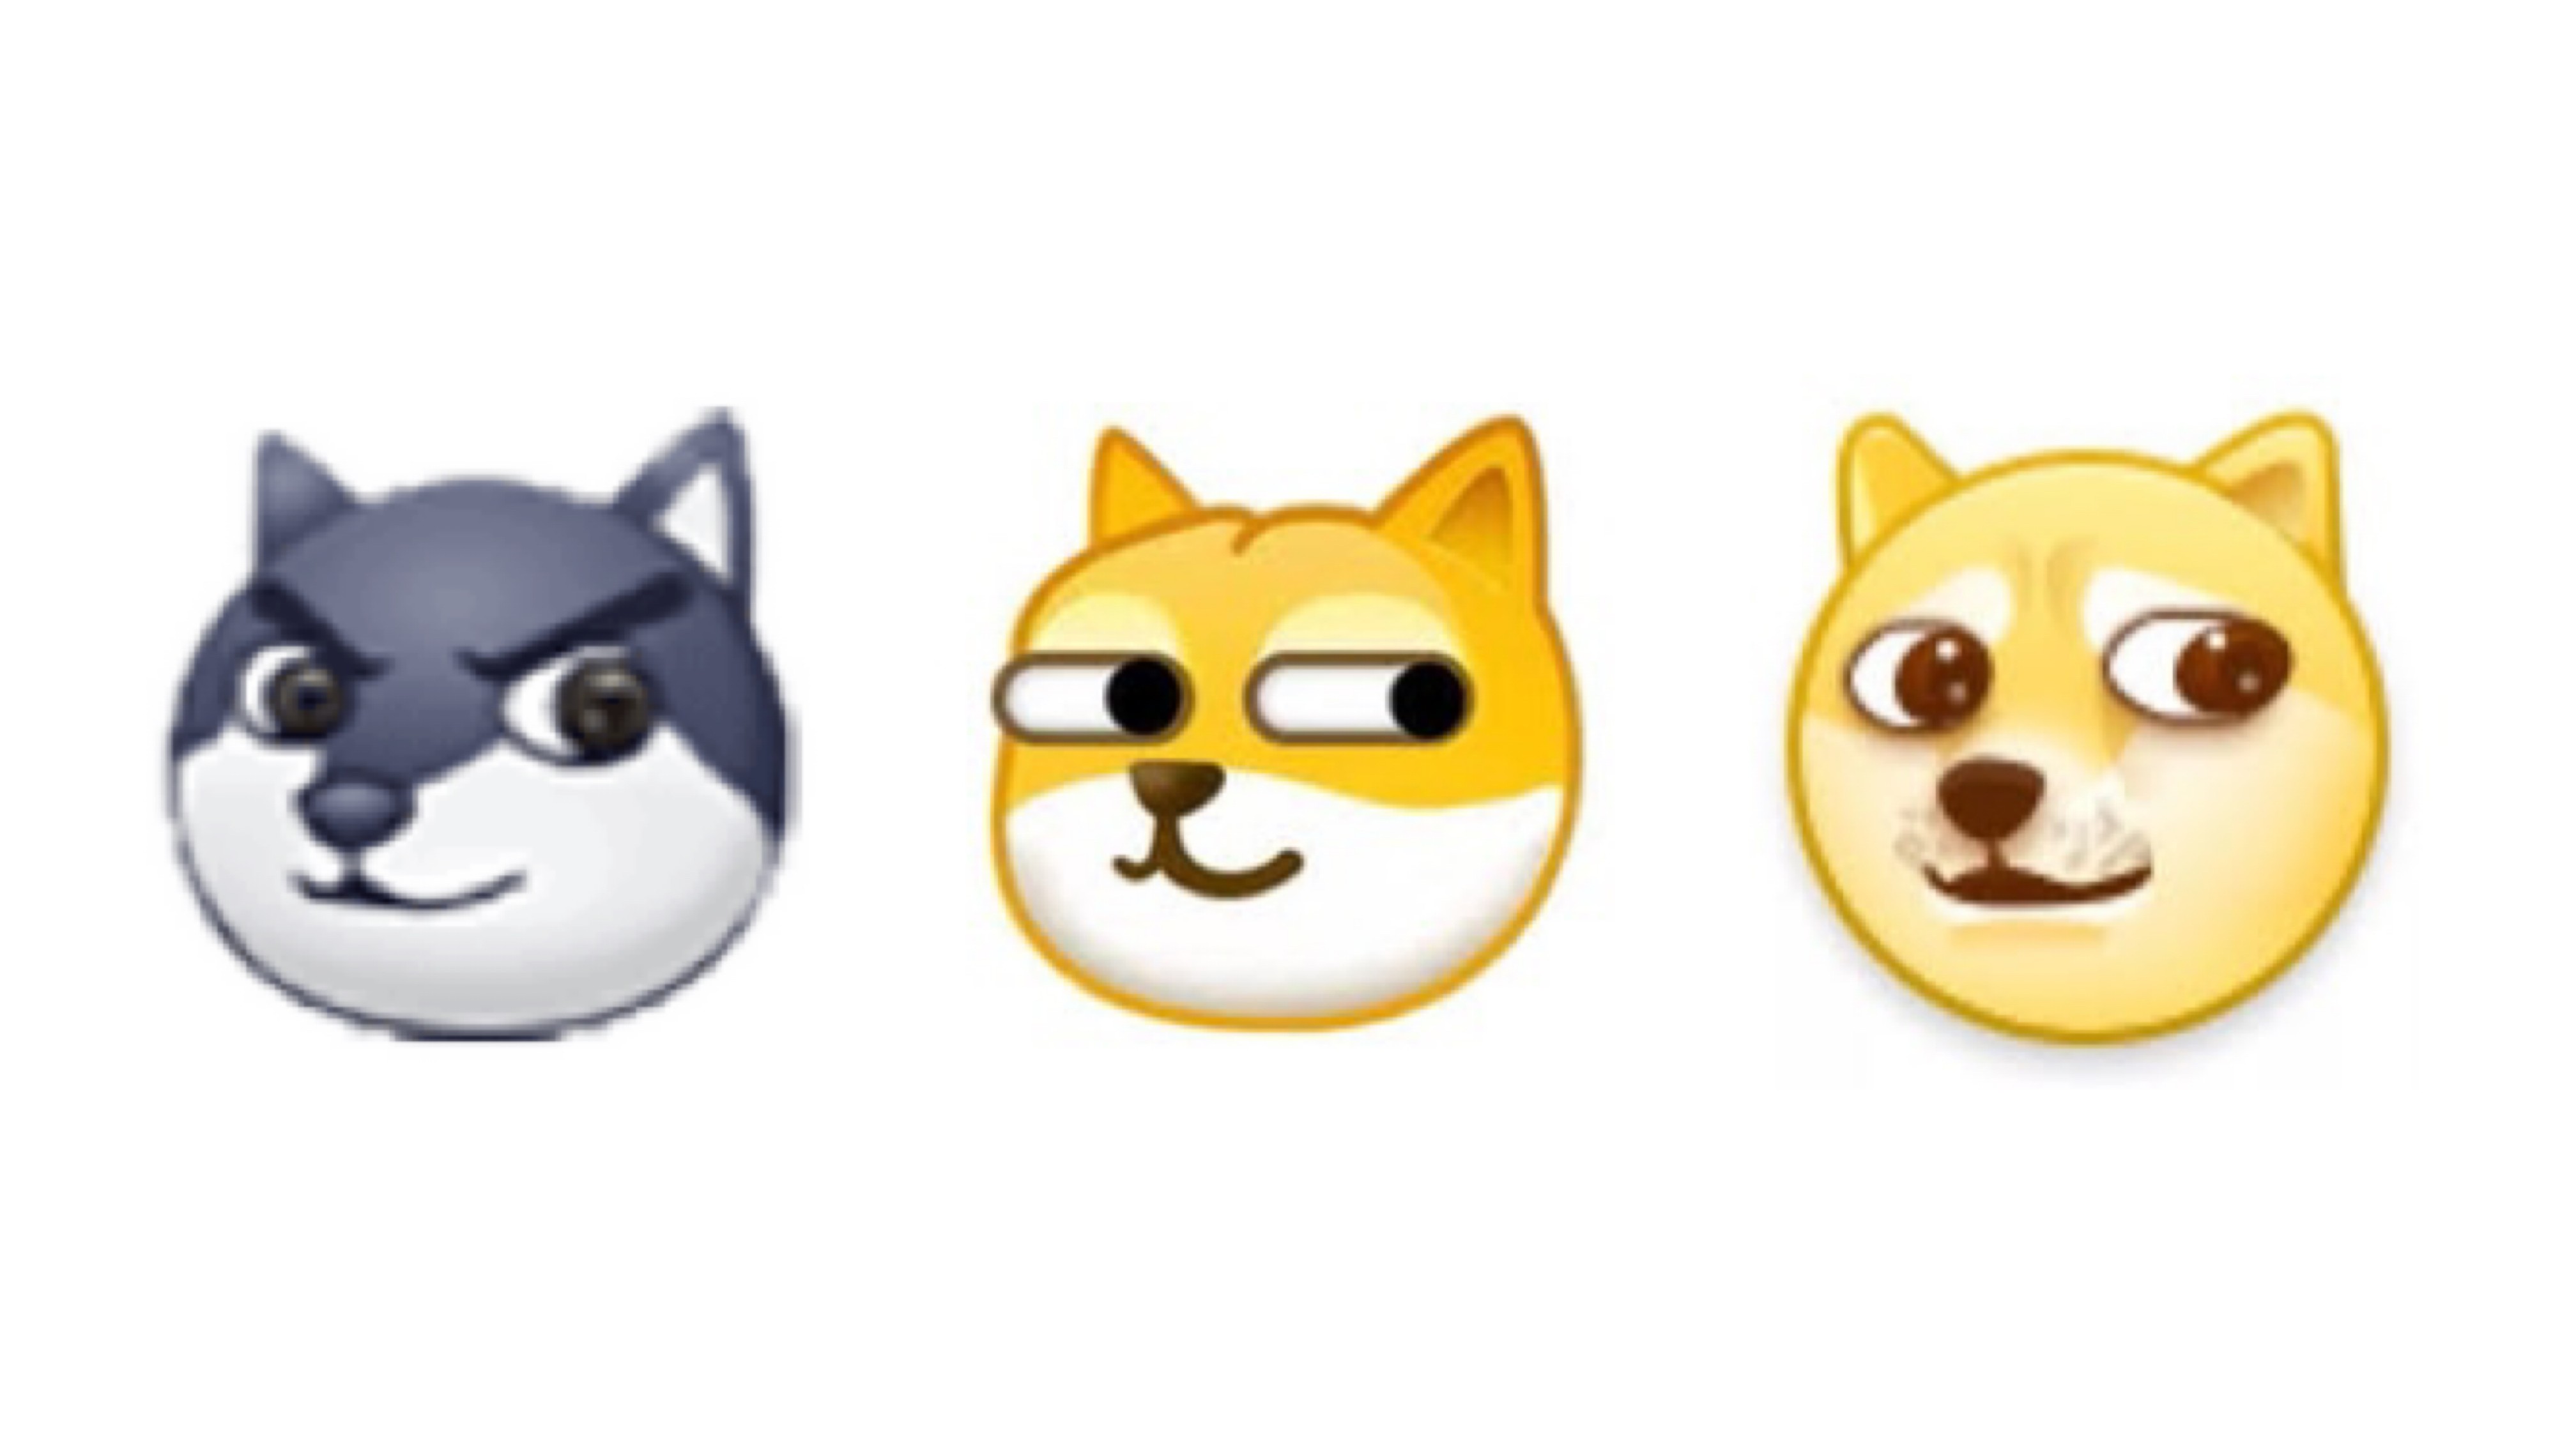 Why is Twitter’s logo replaced with a Doge emoji?